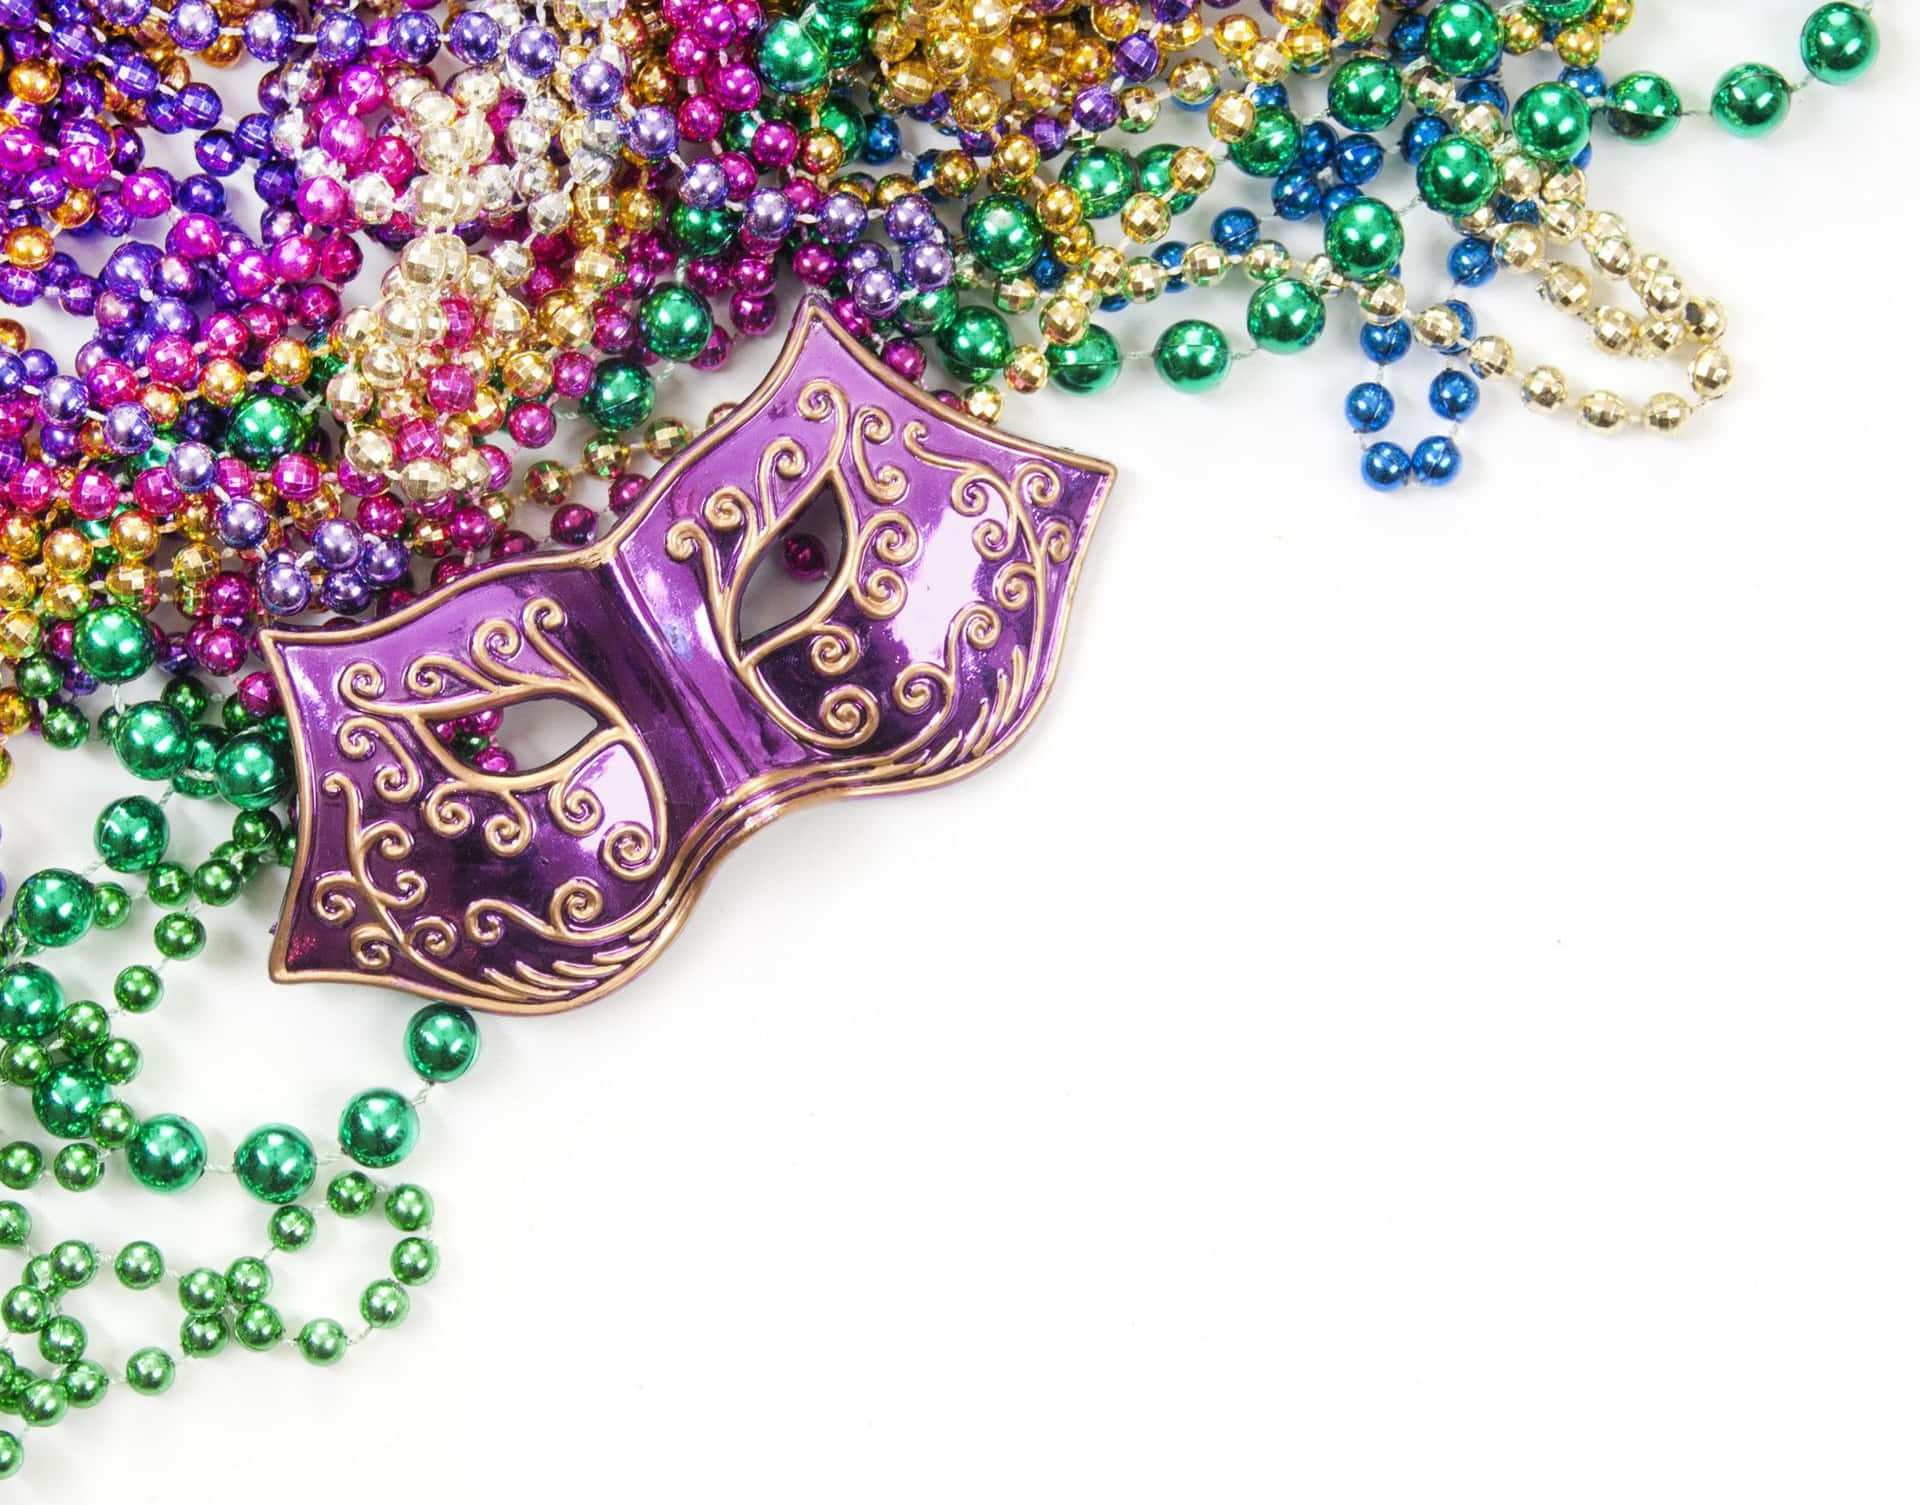 Celebrate Mardi Gras with dancing, parades and festive colors!